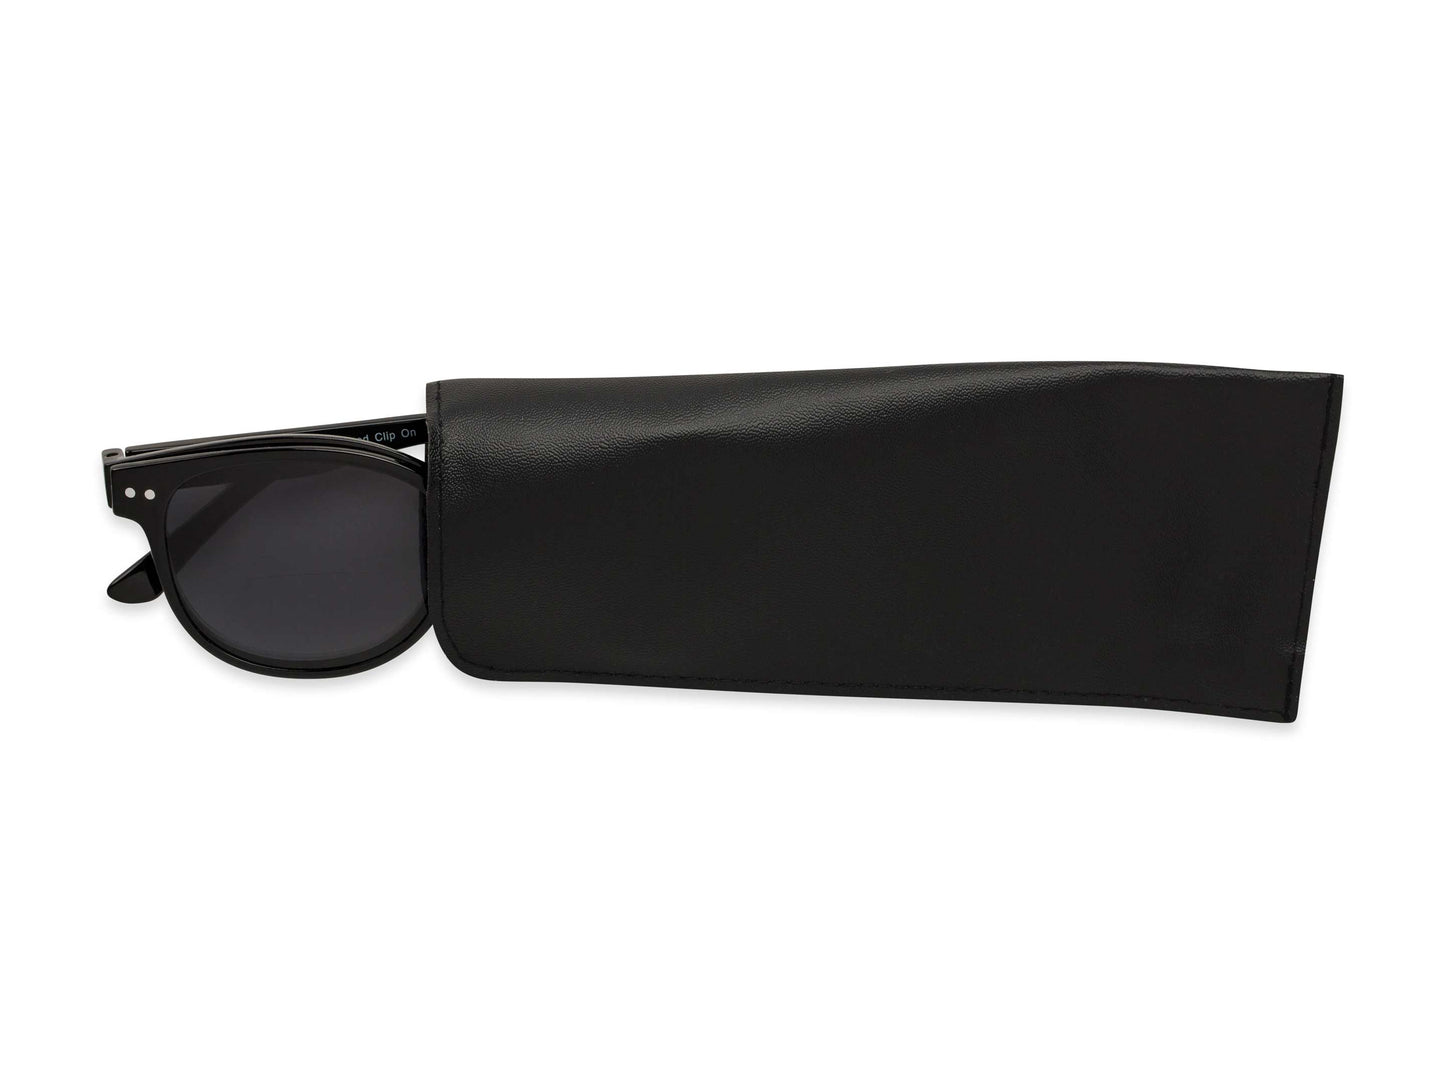 The Cosmo Polarized Magnetic Bifocal Reading Sunglasses